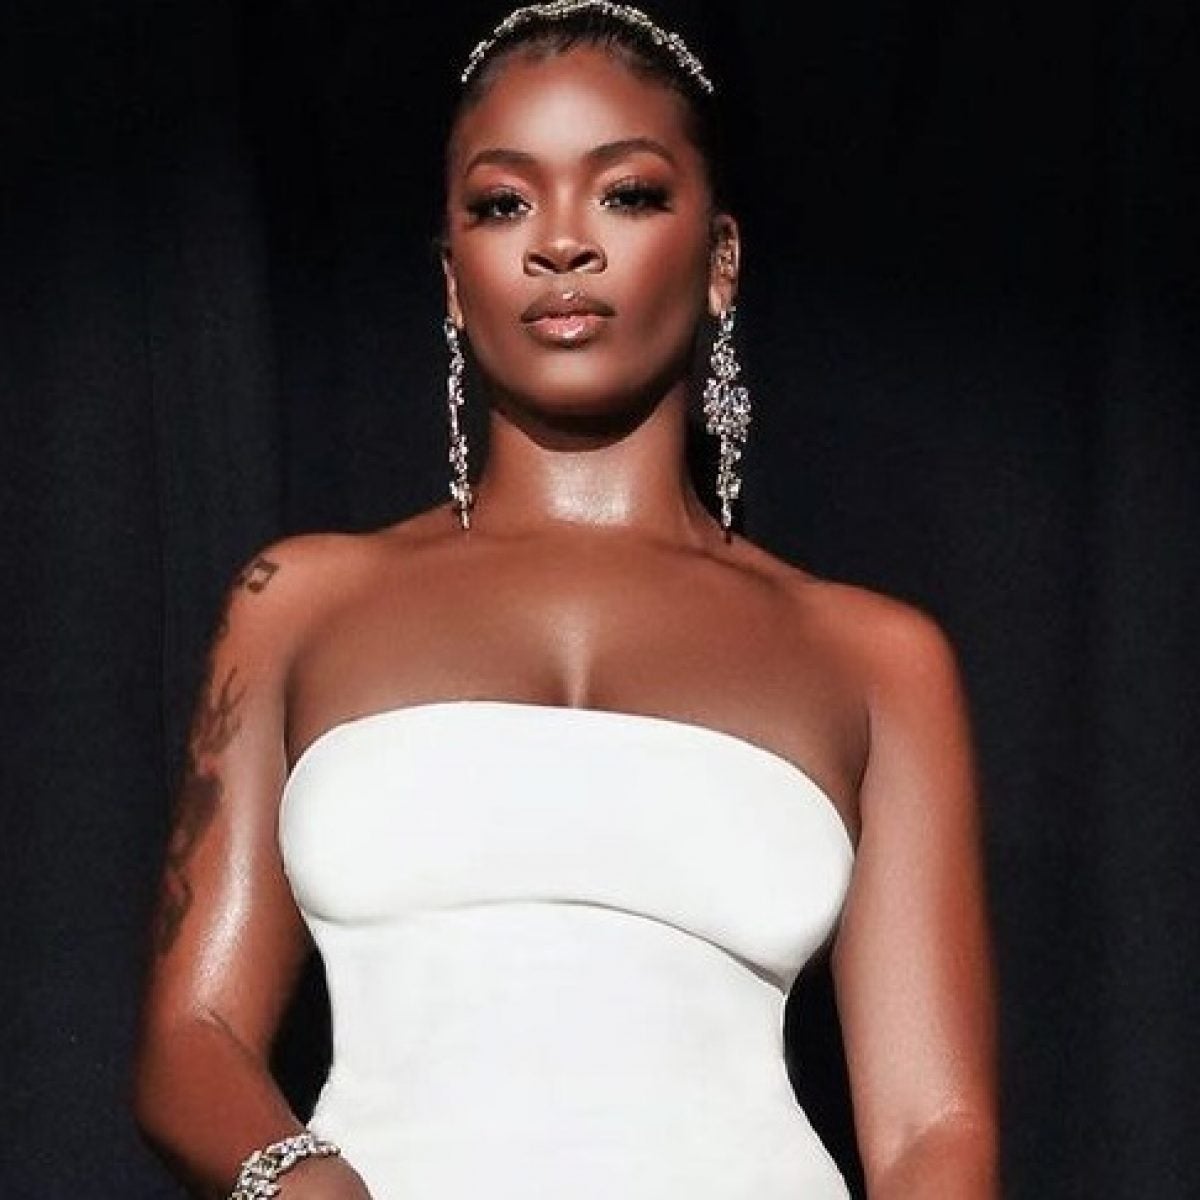 Ari Lennox Shuts Down Instagram Wearing All White—And It's Not The First Time